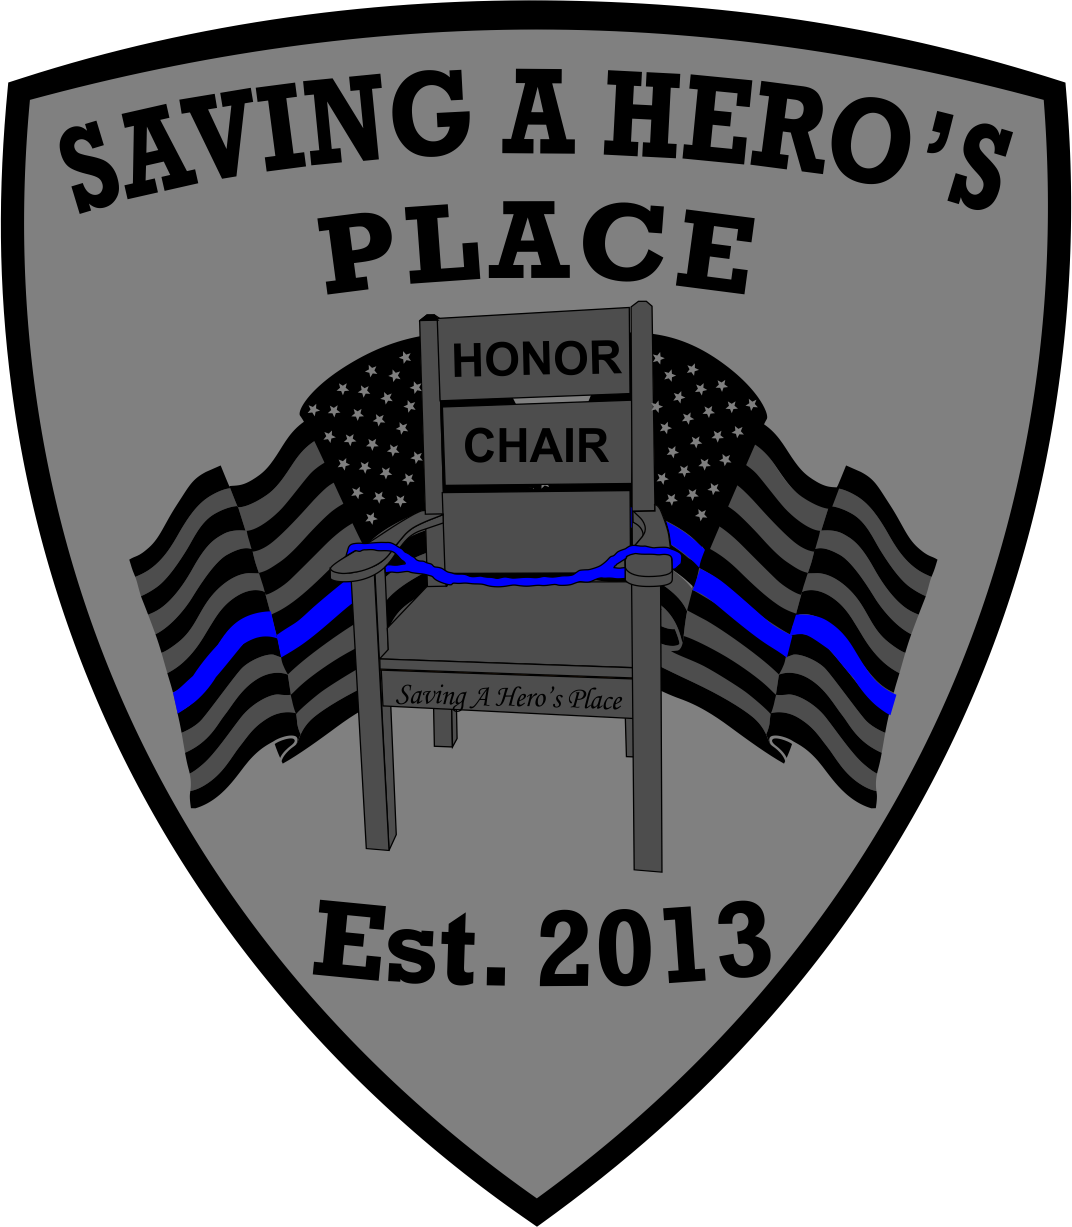 Saving A Hero's Place logo on Ravenox's website, symbolizing tribute to fallen law enforcement officers, with a clickable link directing to the organization's official site.